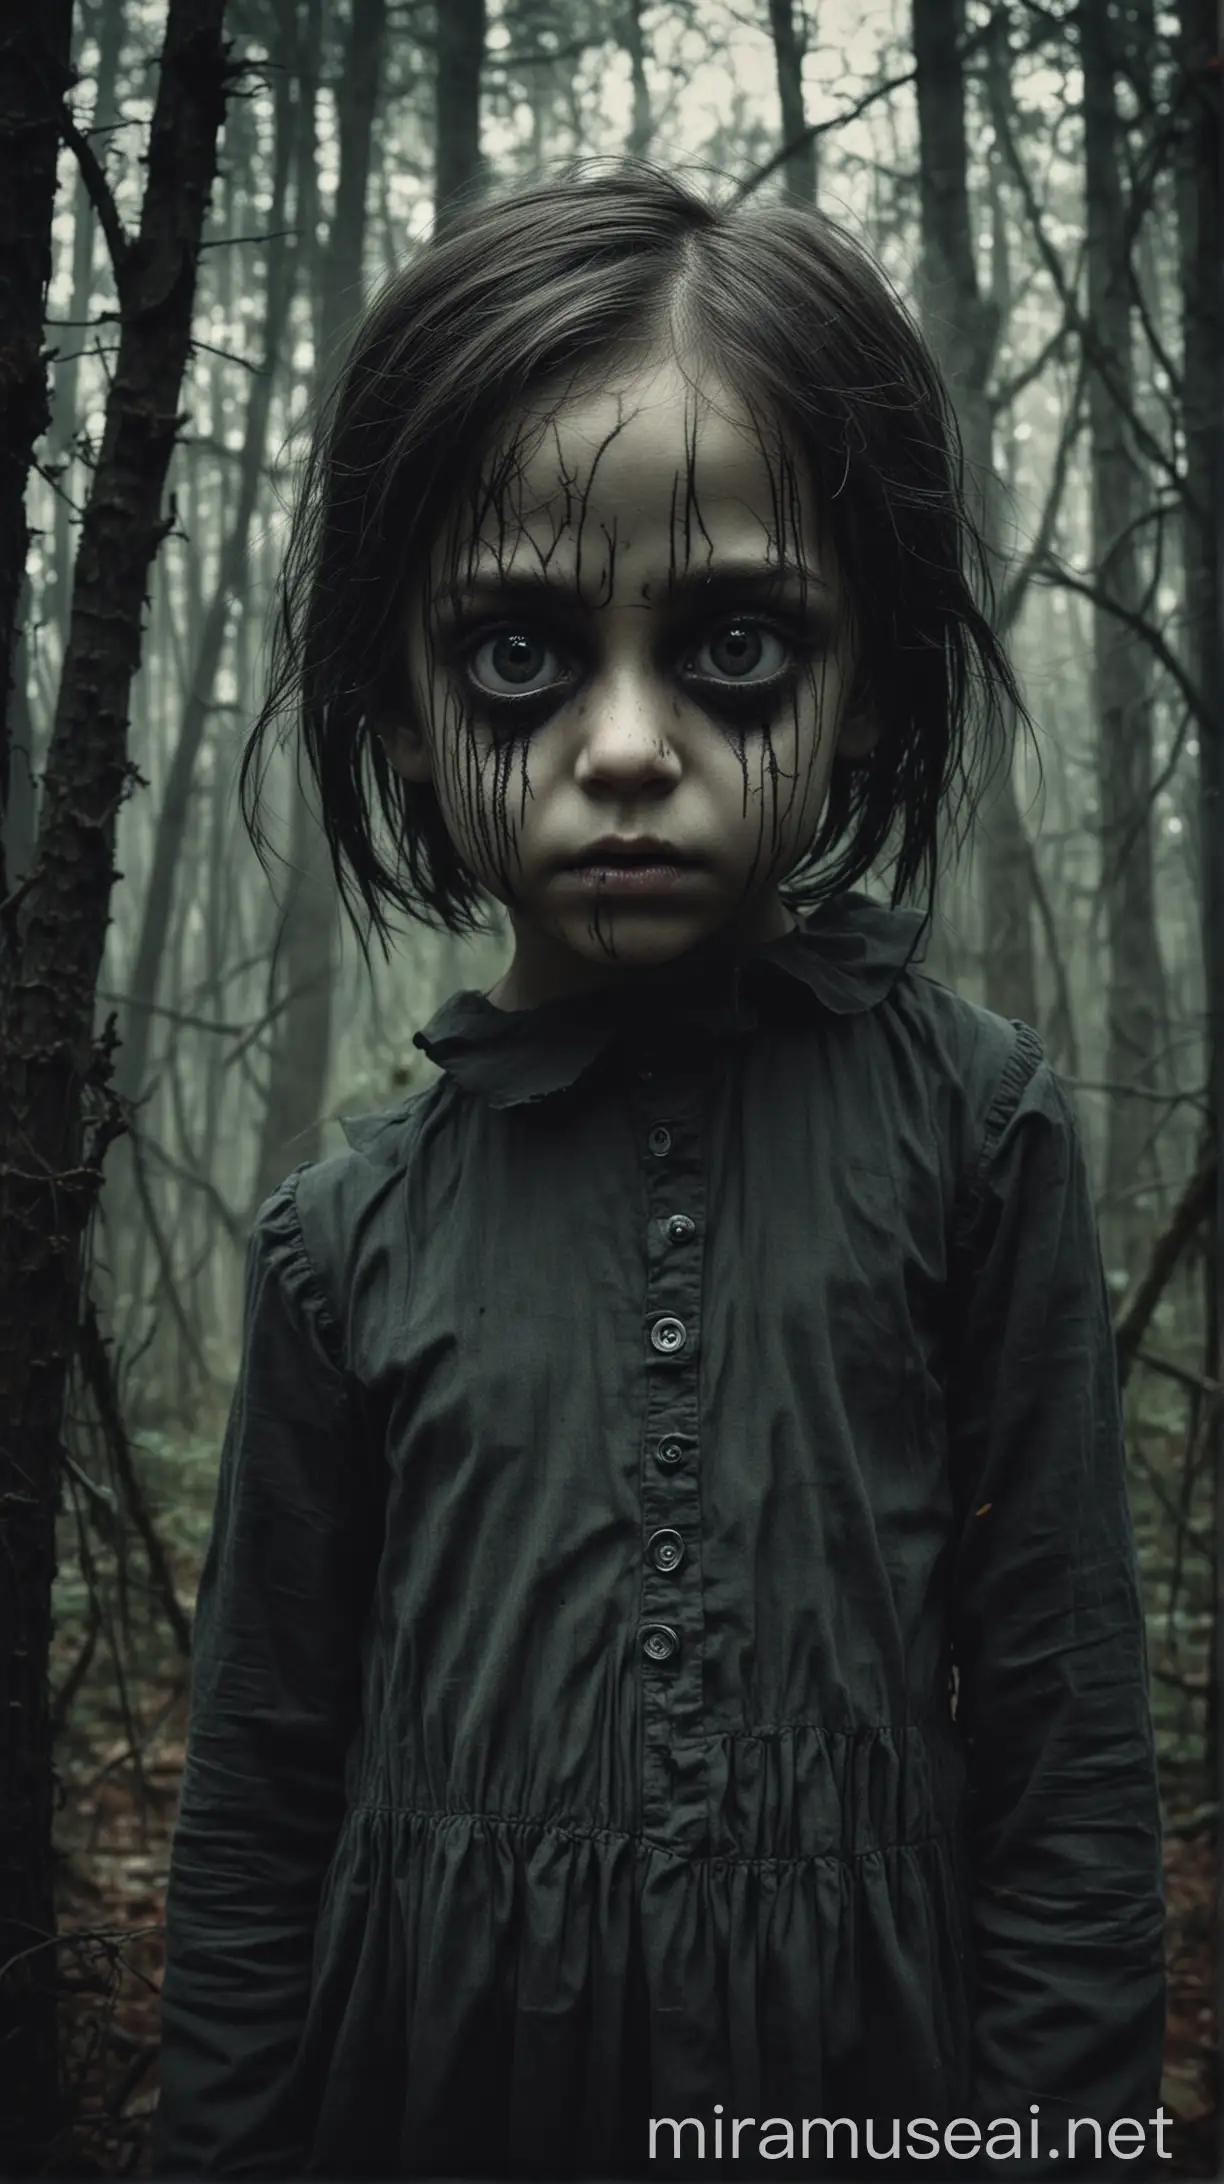 create an image inspired by a black-eyed children child in a dark forest with a creepy mast on looking into the camera